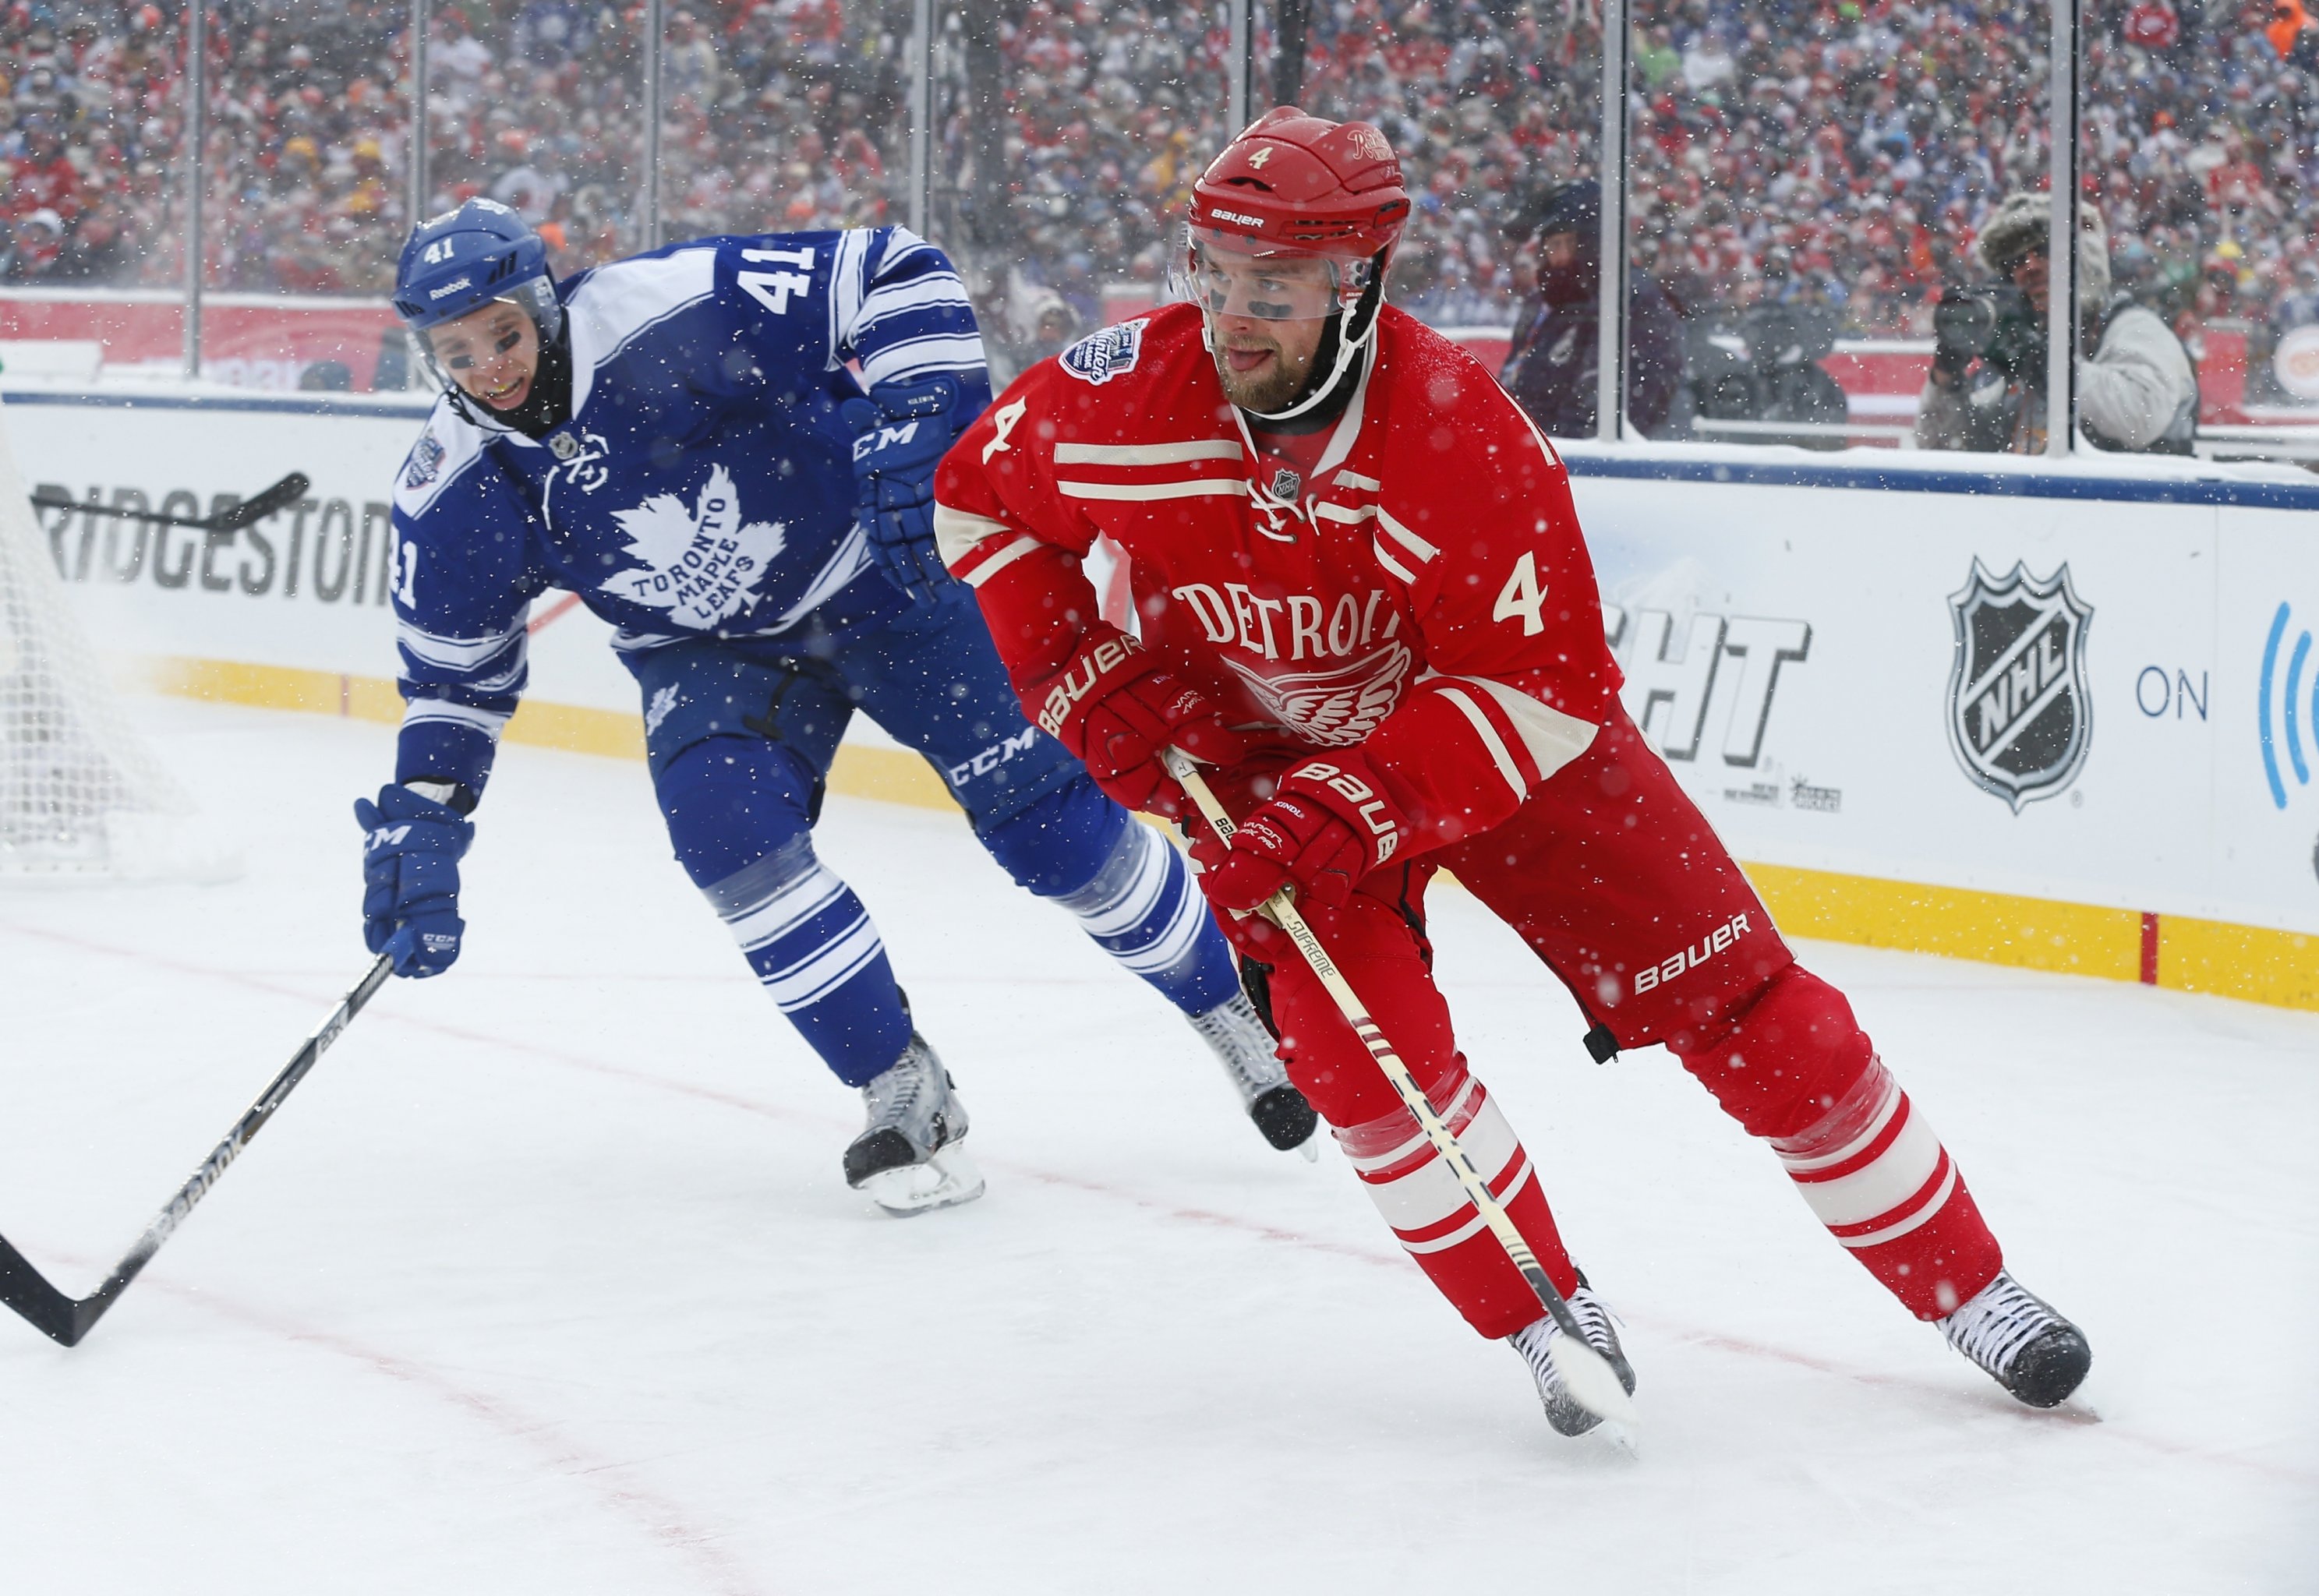 Top 10 Goals From The NHL's Outdoor Games